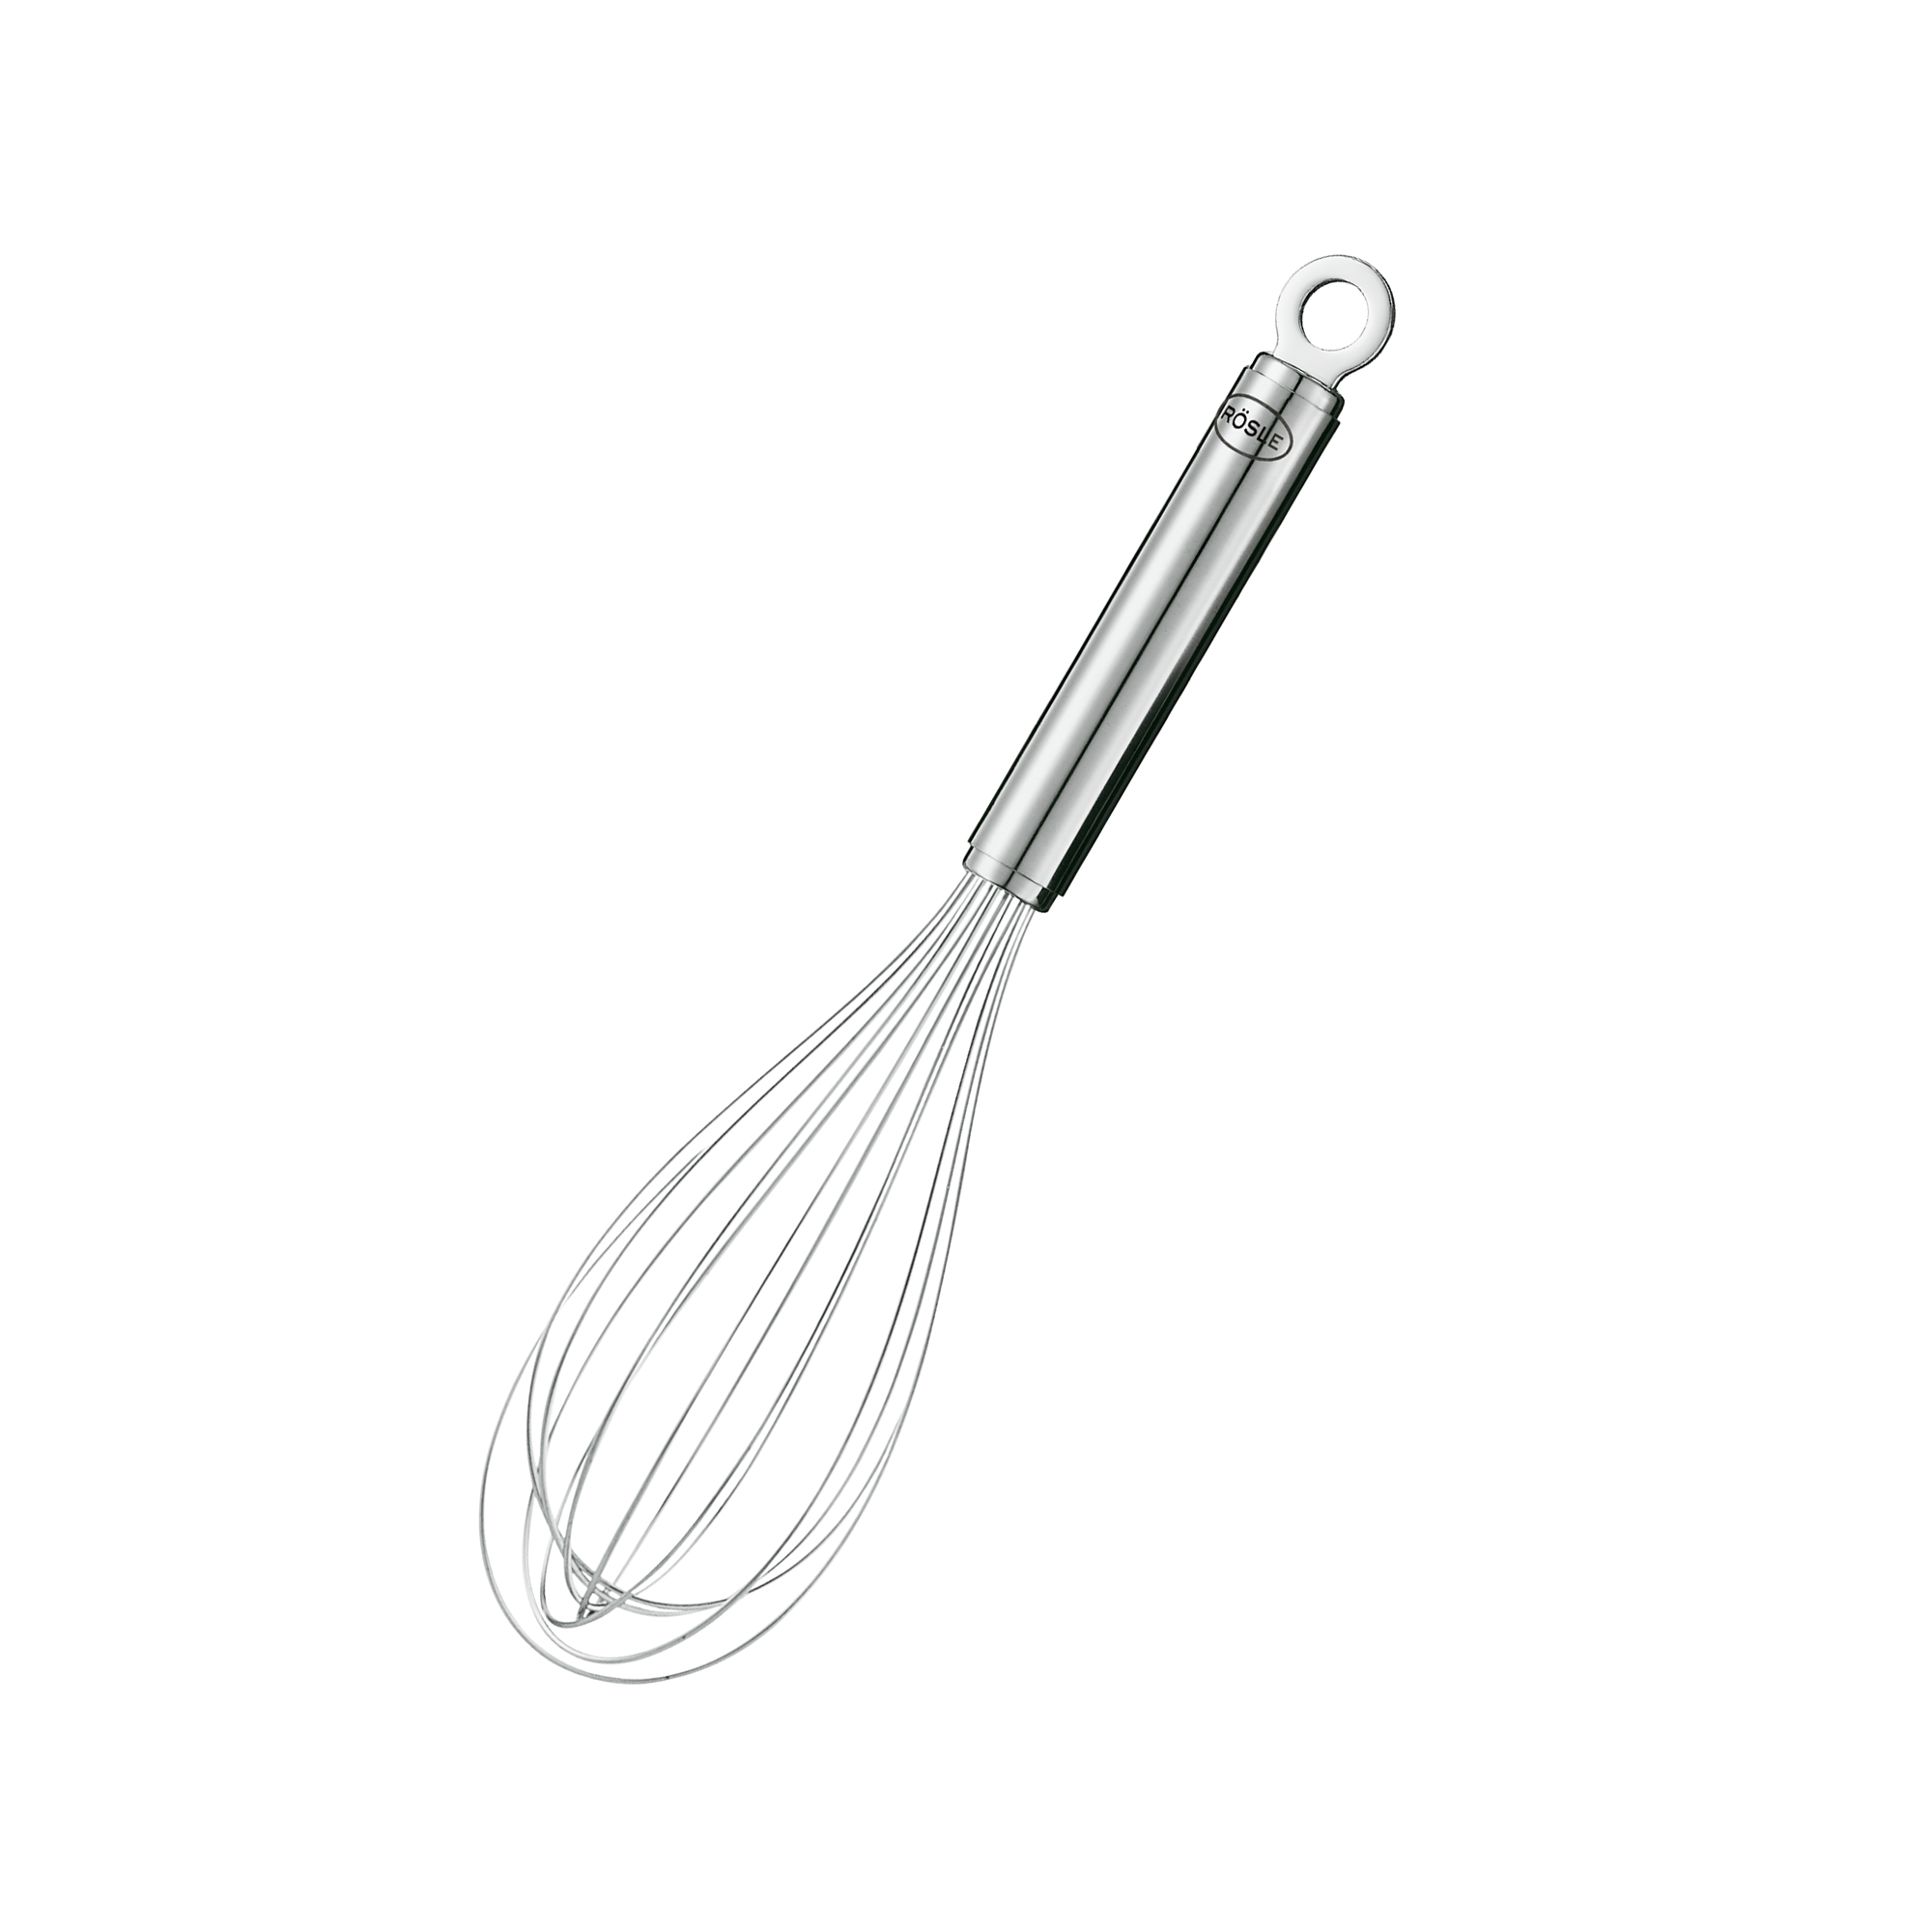 French Whisk 35 cm | 13.8 in. Classic